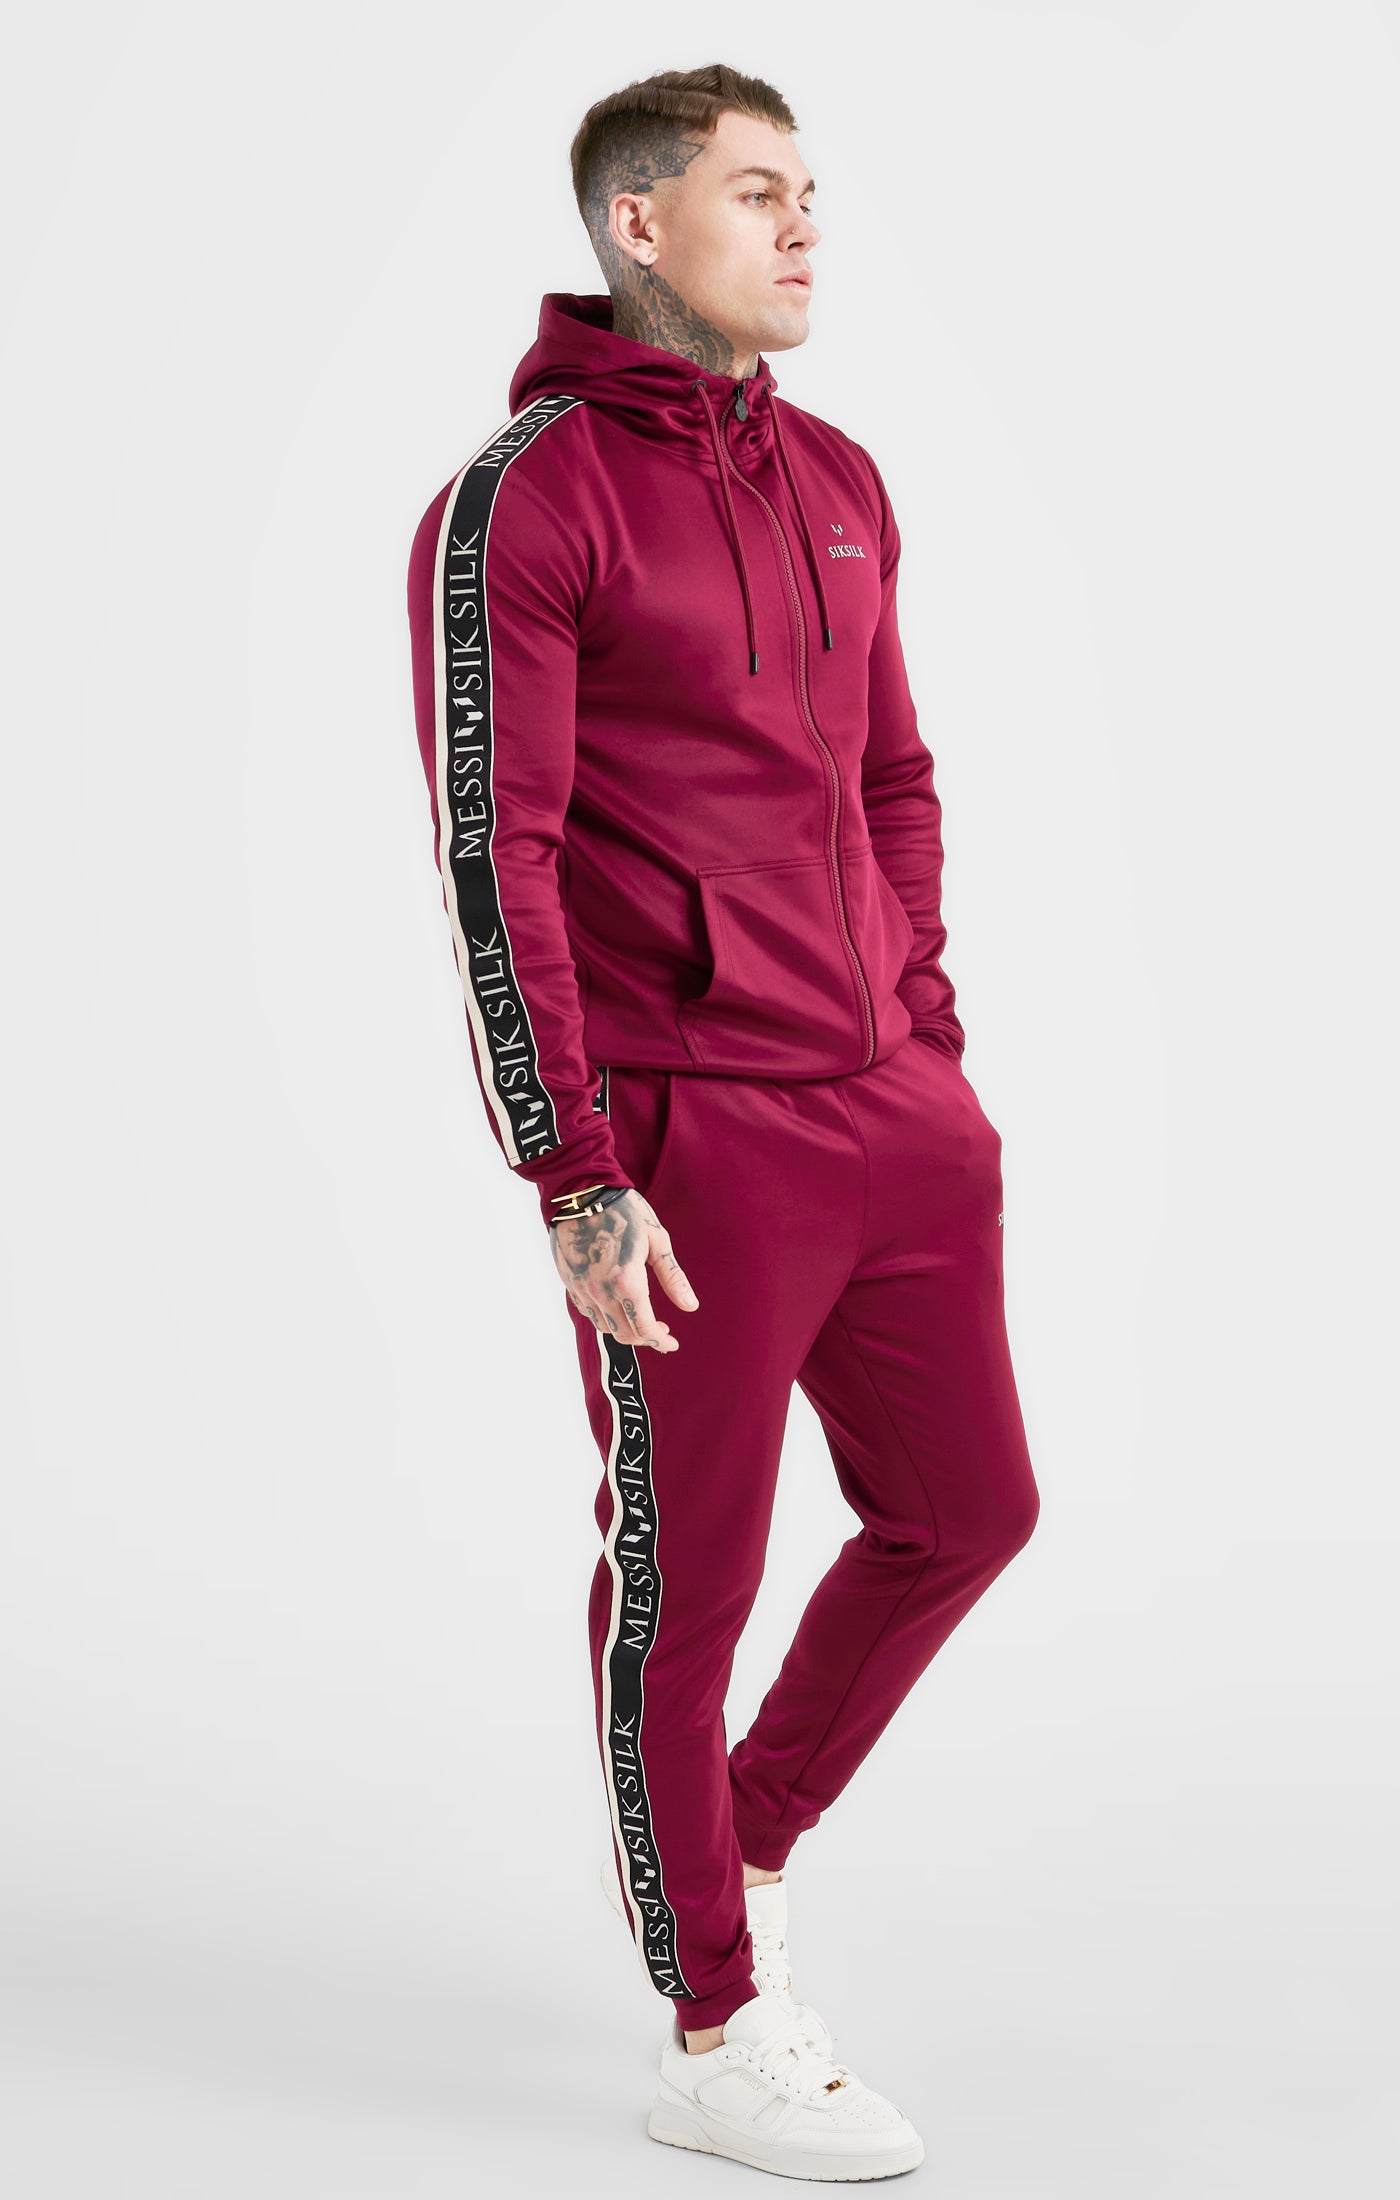 Load image into Gallery viewer, Messi x SikSilk Taped Zip Through - Burgundy (3)